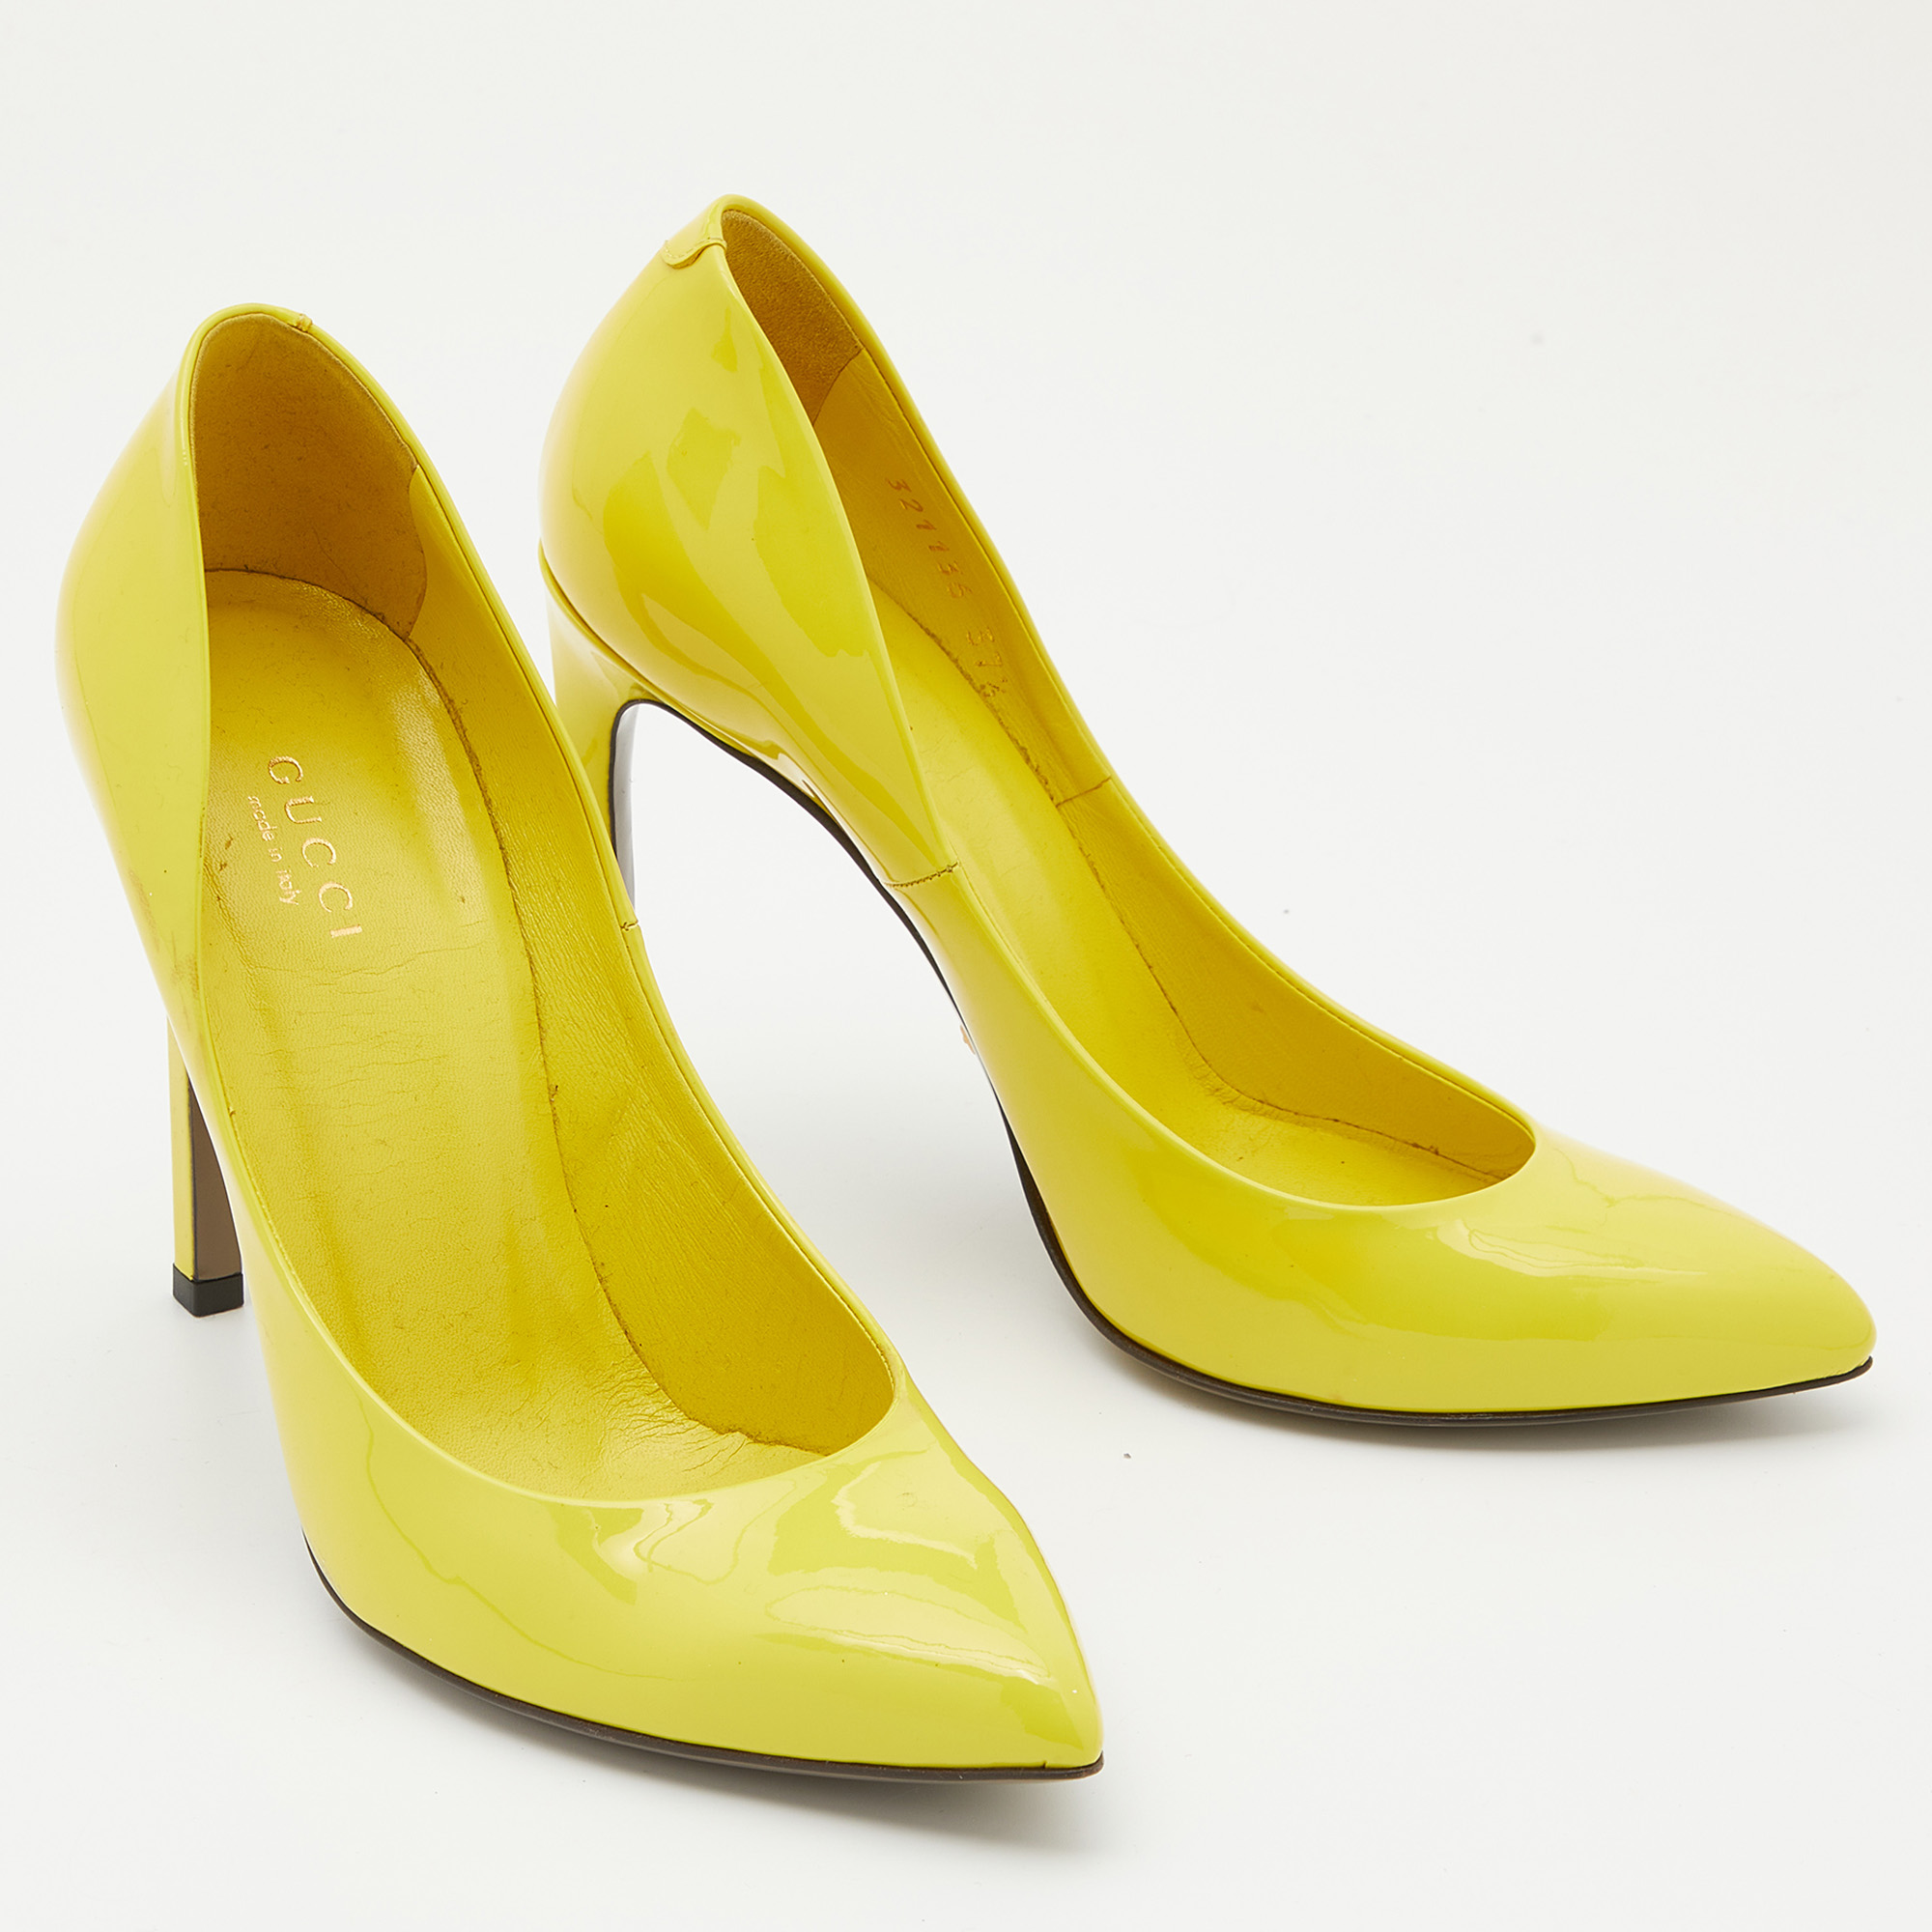 Gucci Bright Yellow Patent Leather Pointed Toe Pumps Size 37.5